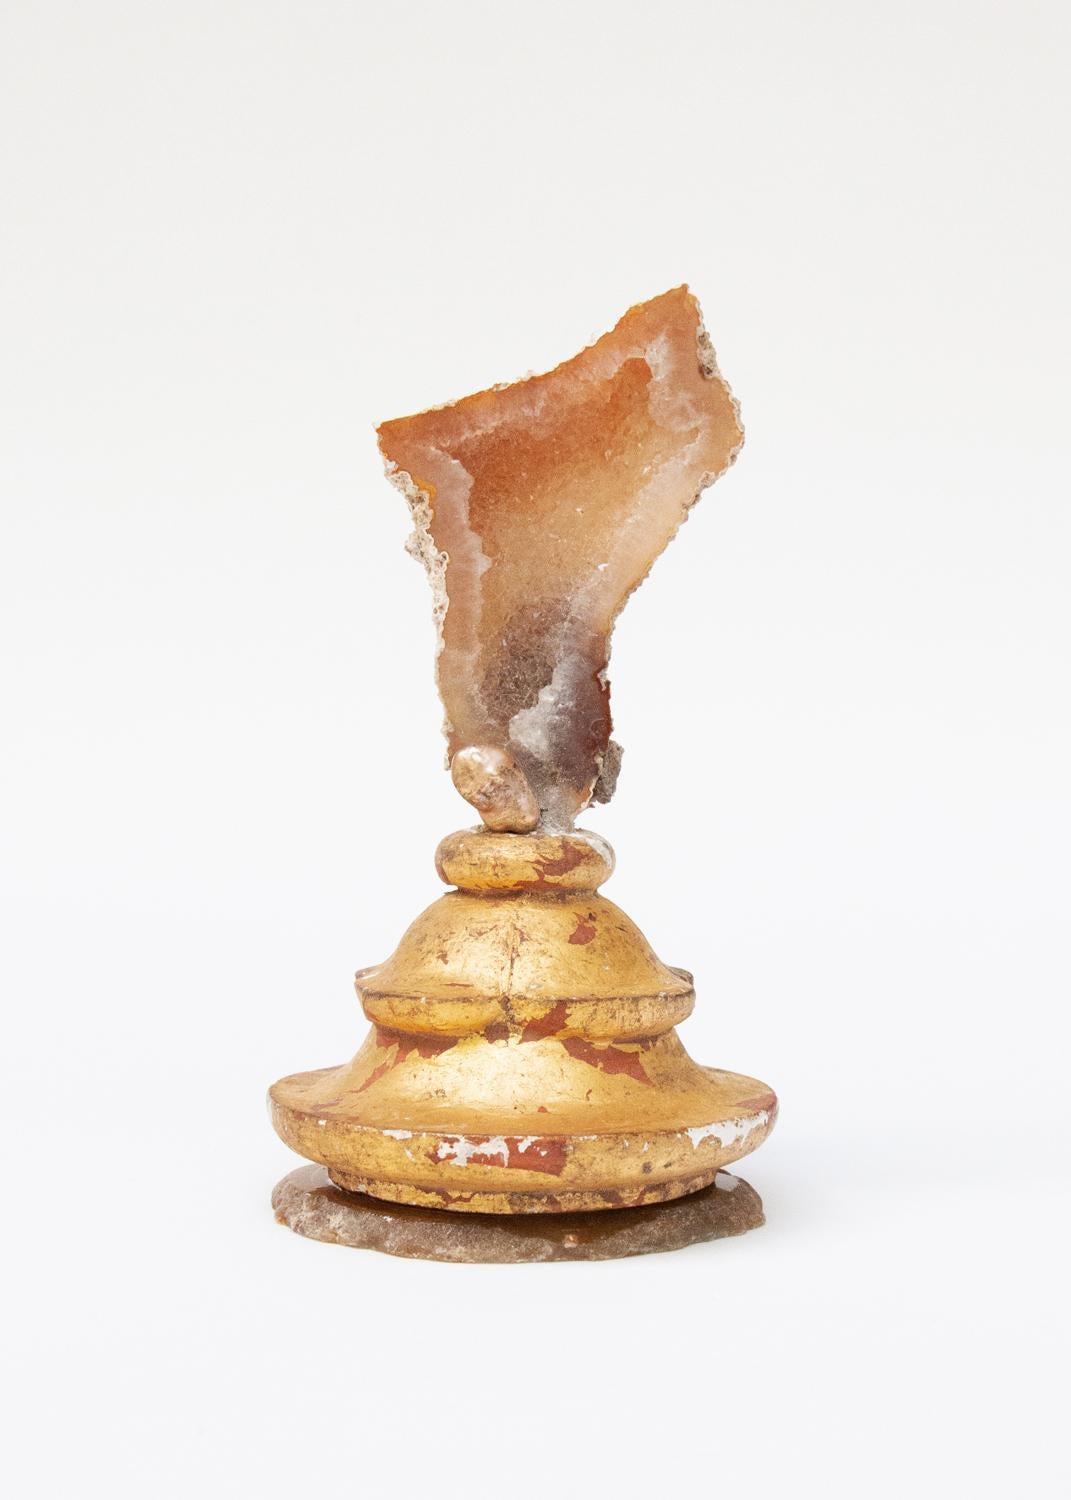 Sculptural 18th century Italian gilded candlestick top with fossil agate coral.

The fragment was originally part of an 18th century Italian candlestick from a historic church. It has the original gold leaf and red bole paint that coordinates with